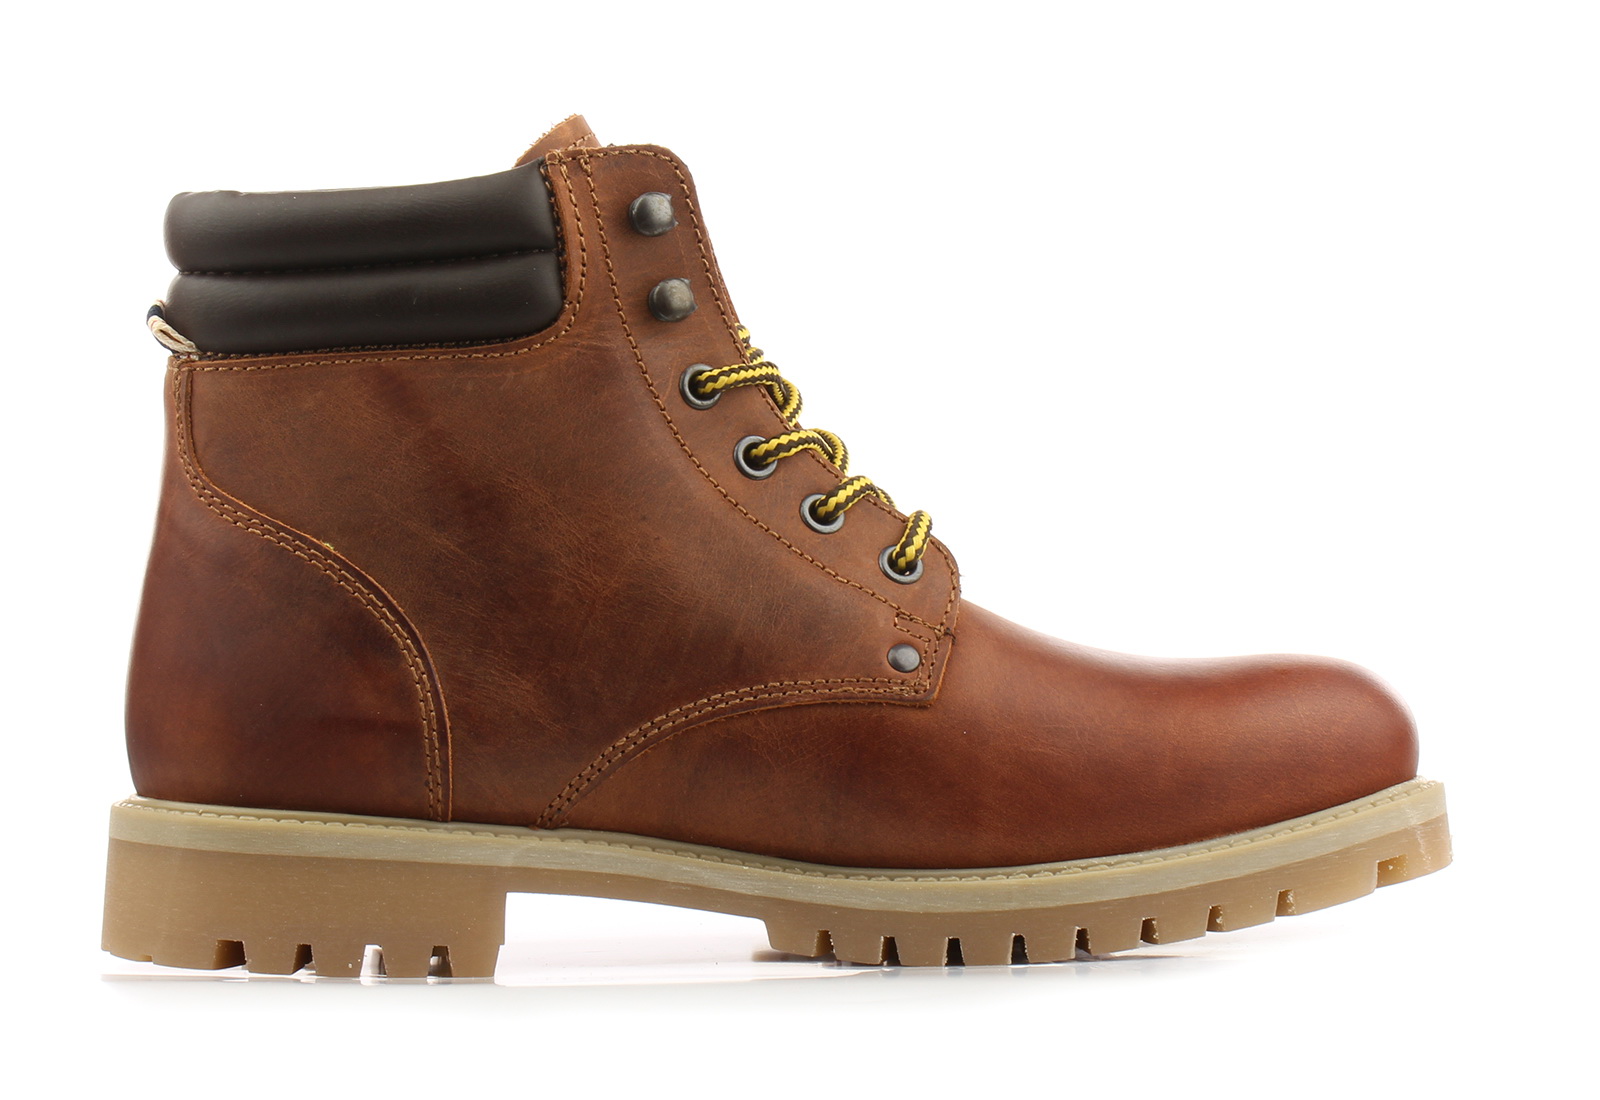 Jack And Jones Outdoor boots - Jfwstoke Leather Boot - 12140826-RST -  Online shop for sneakers, shoes and boots